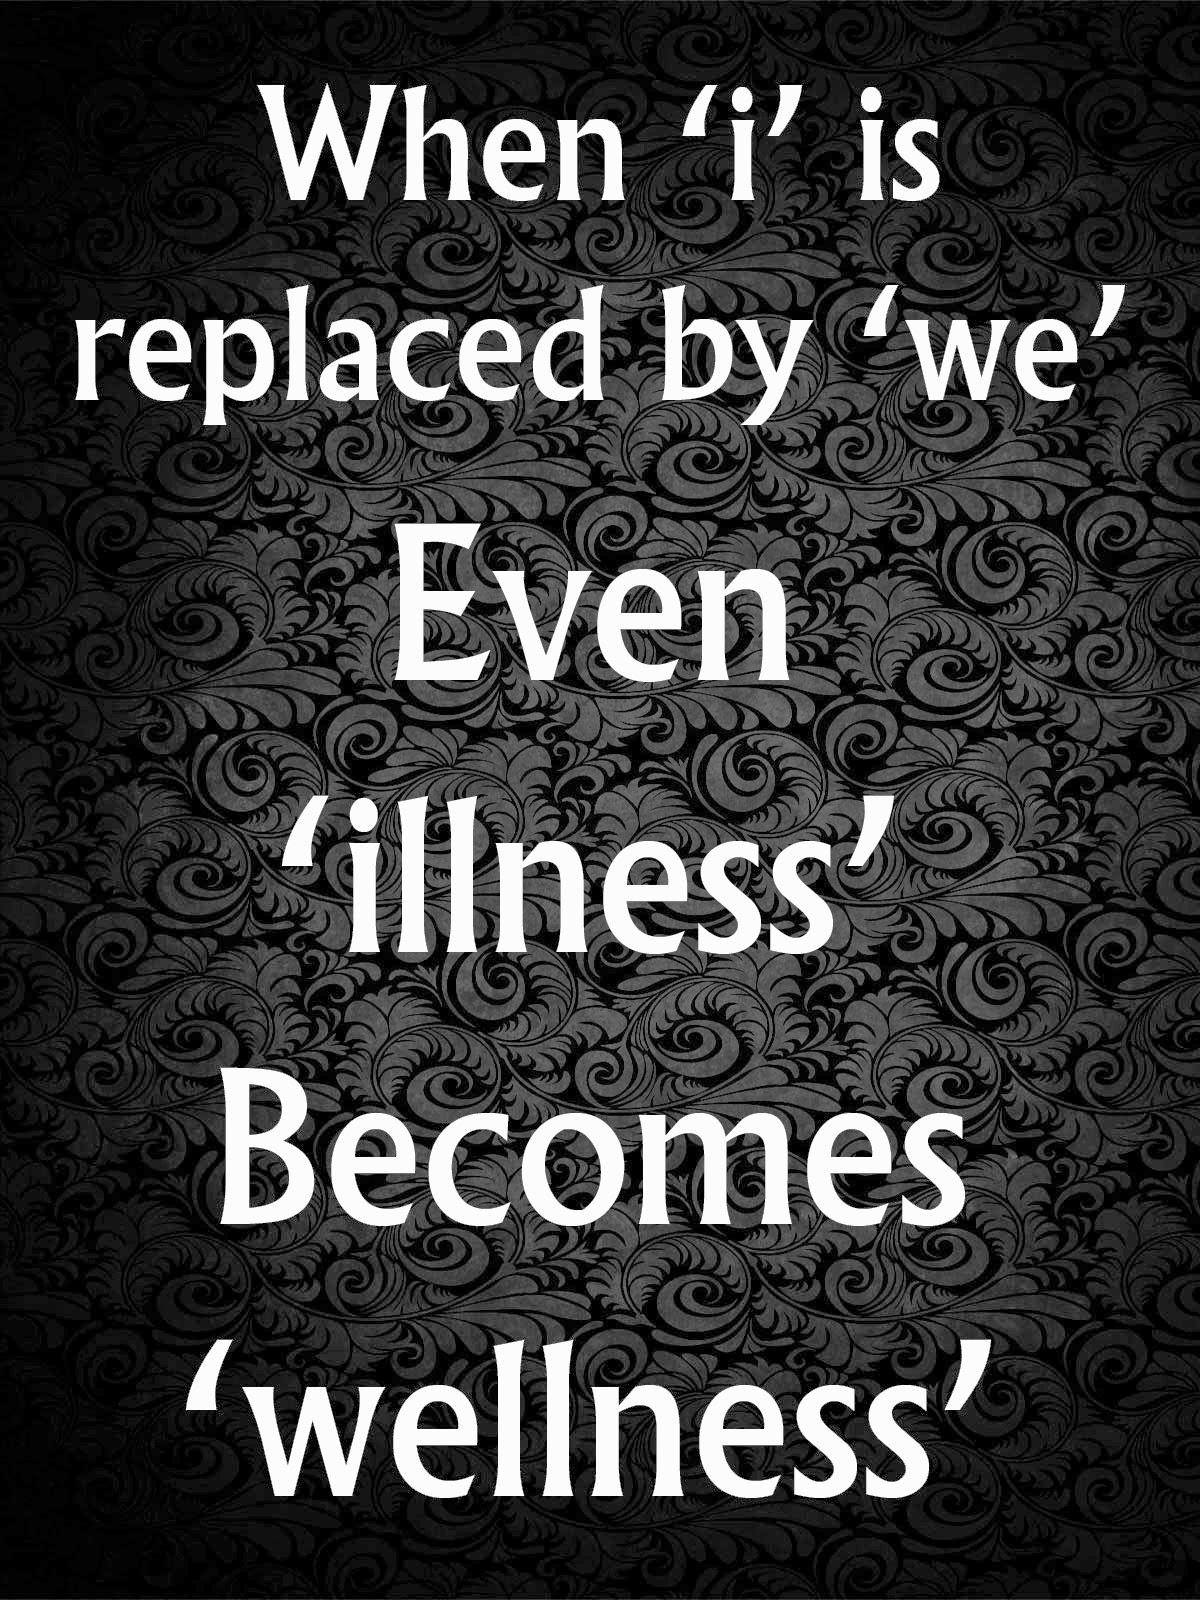 Decent Image Scraps: When i is replaced by we even illness becomes wellness